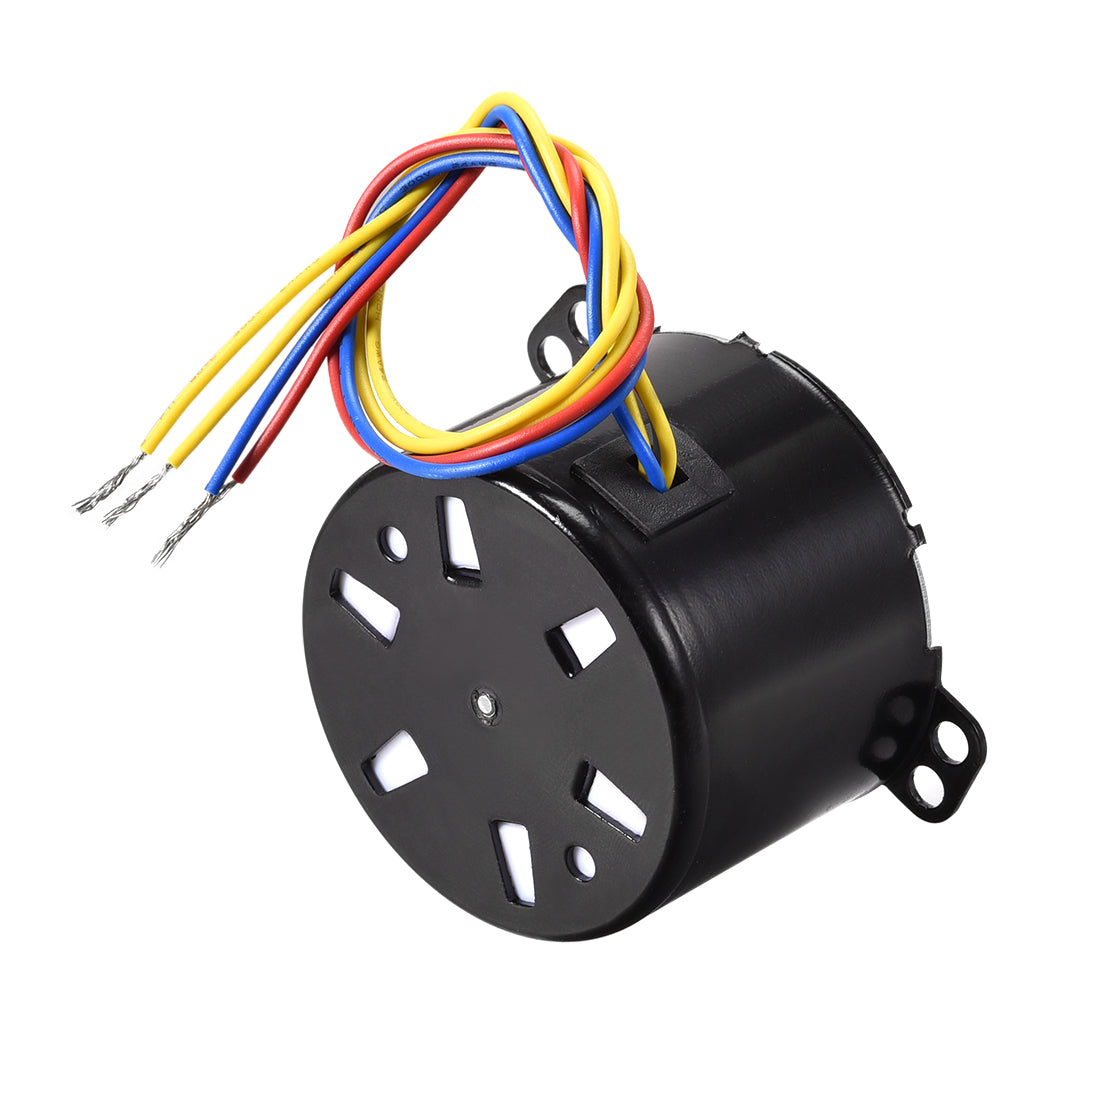 uxcell Uxcell AC 220V Electric Synchronous Motor Plastic Gear Turntable /C 5RPM 50-60HZ 6W 7mm Dia Eccentric Shaft with Hole